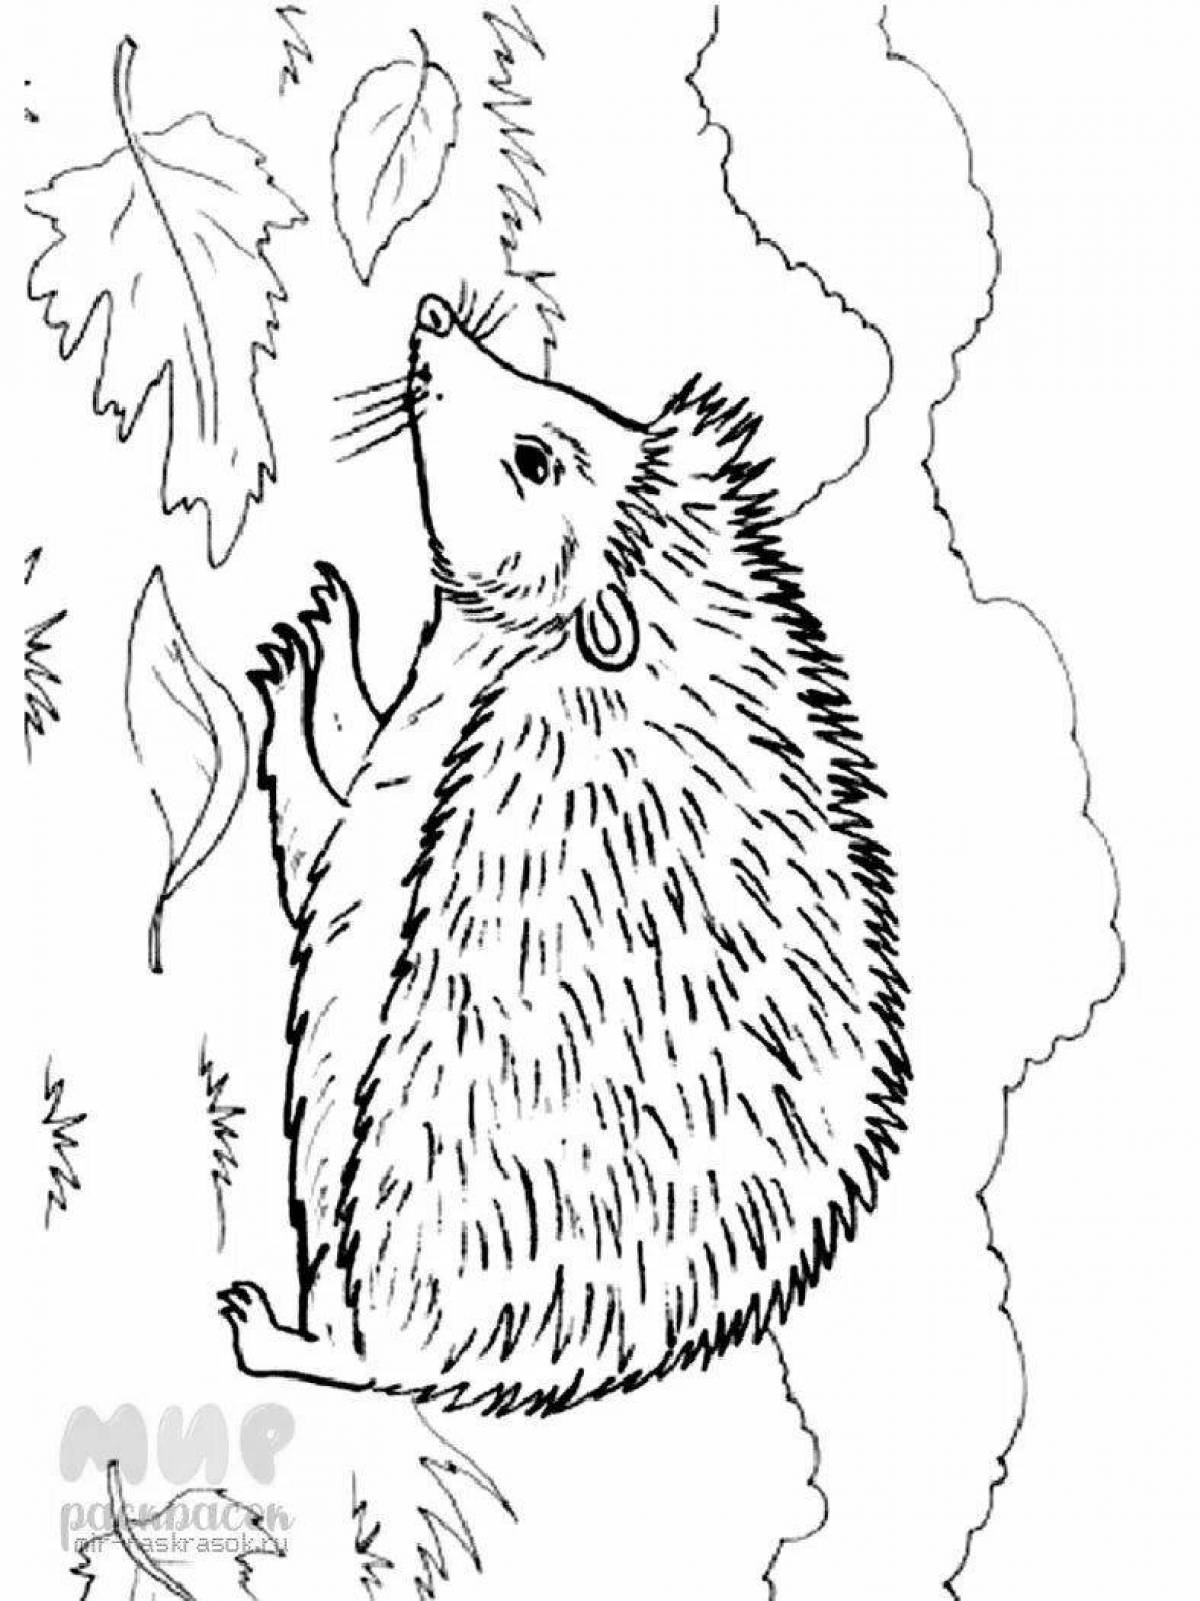 Nimble hedgehog in the forest